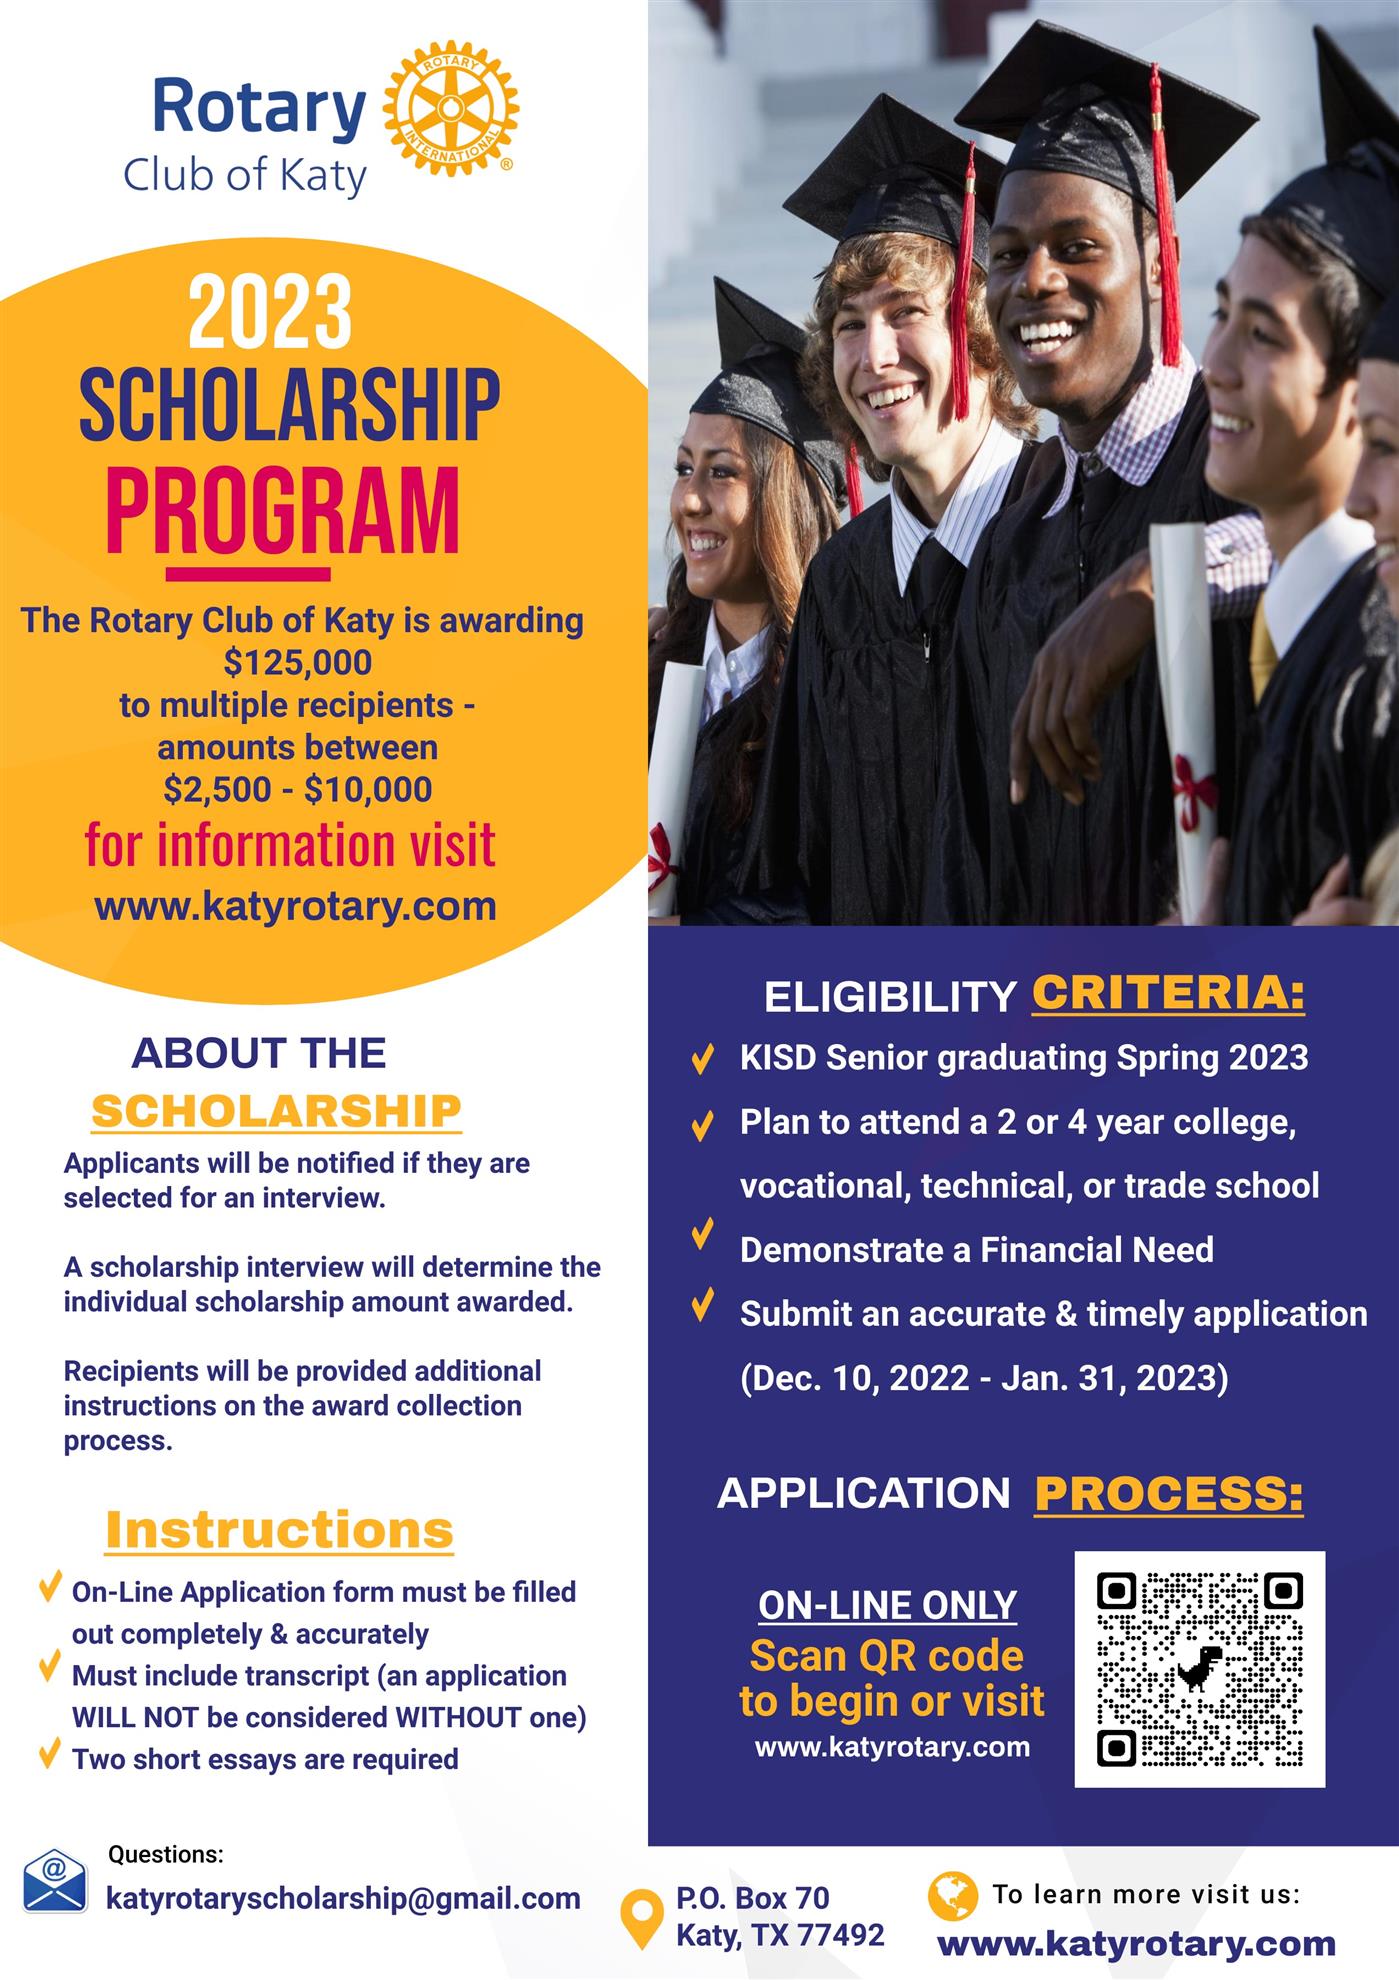 Rotary Club of Katy Scholarship Application Deadline Fast Approaching pic pic